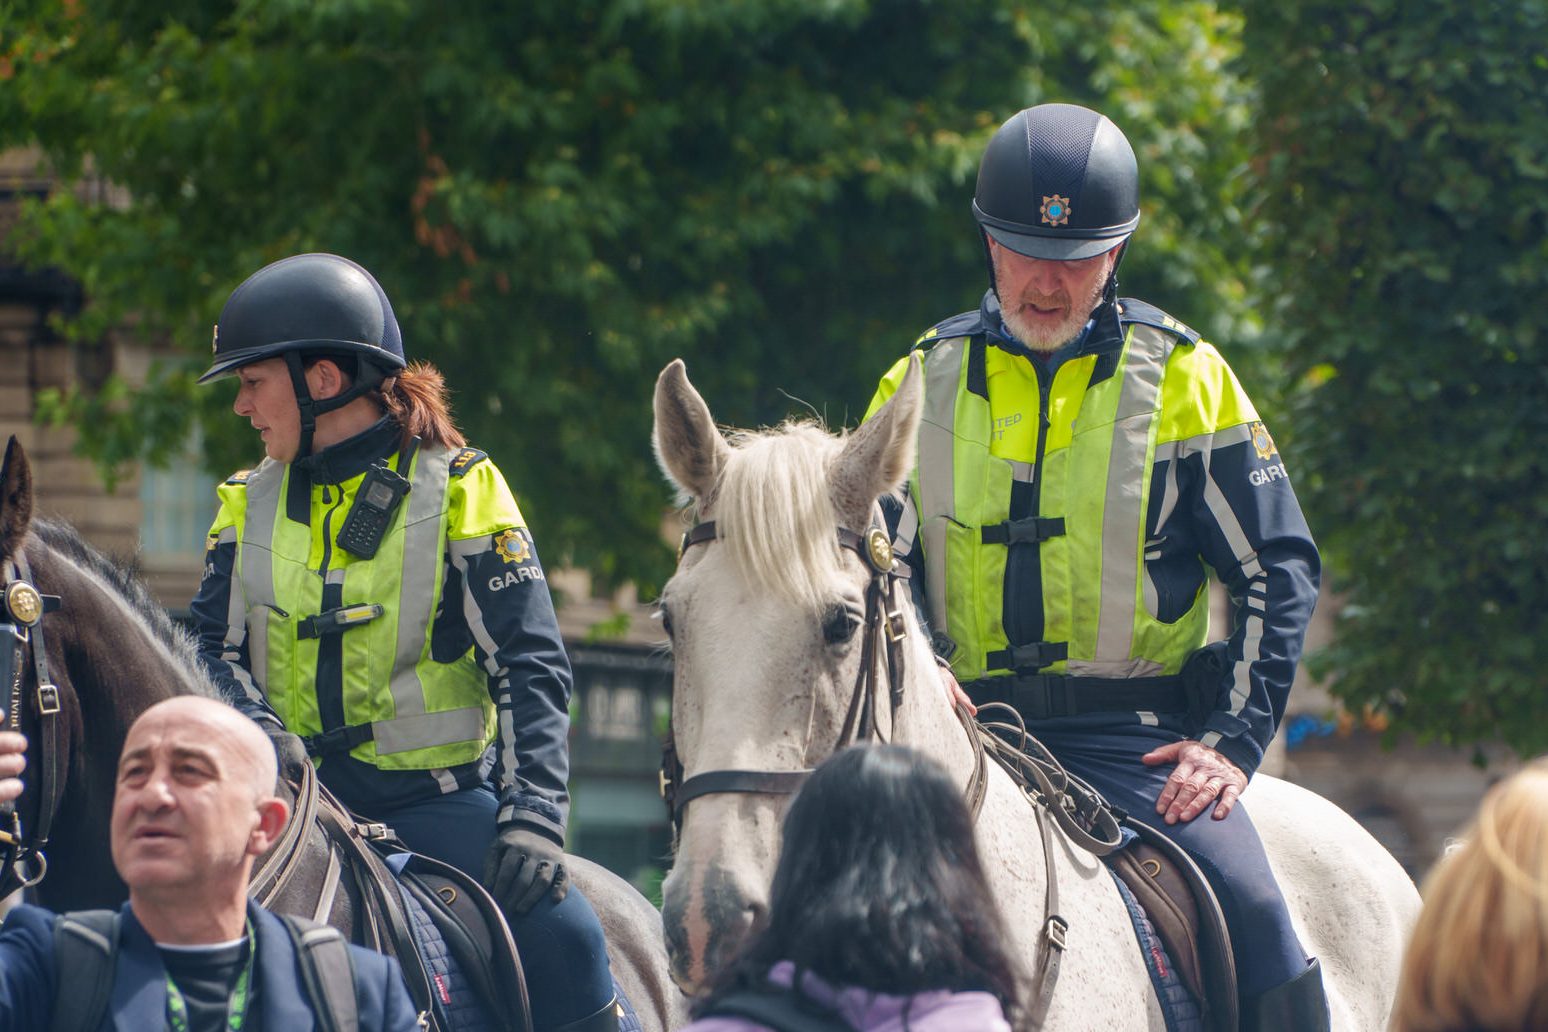 THE MINISTER RESPONSIBLE PROMISED ADDITIONAL POLICING [THEY HAVE ARRIVED WITH THEIR HORSES IN O'CONNELL STREET] 002